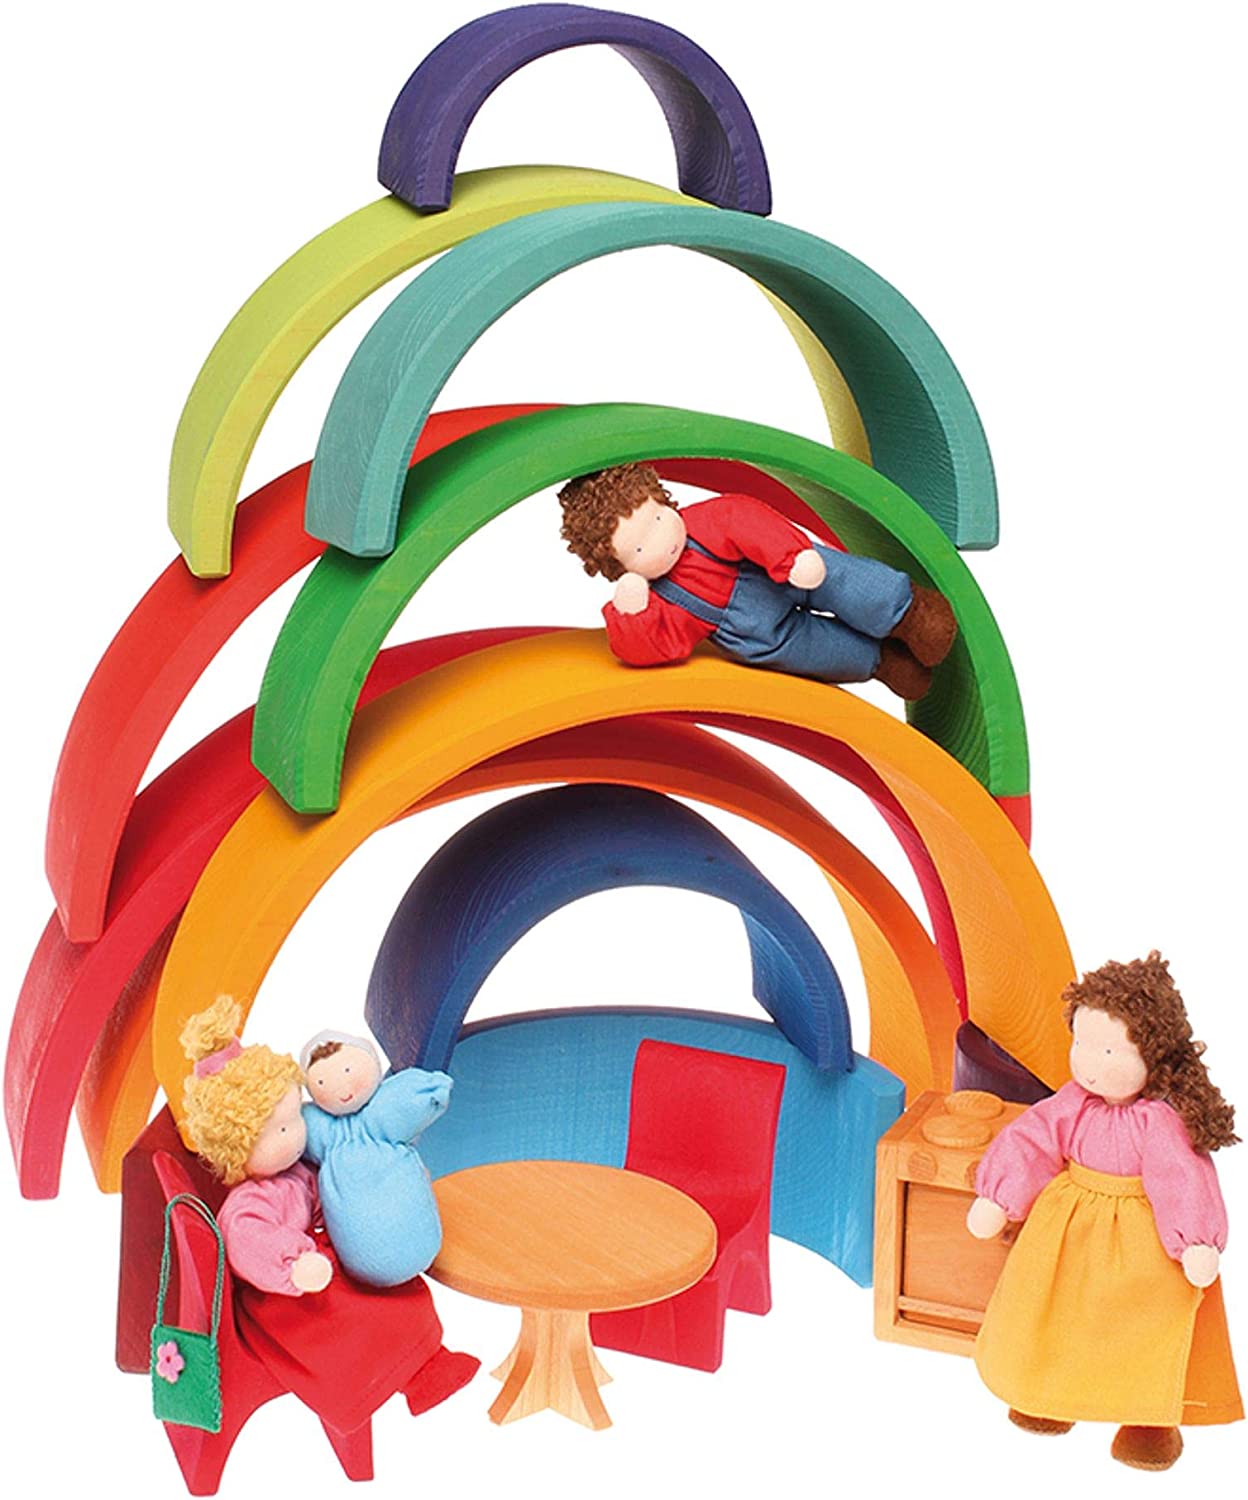 12 Piece Wooden Rainbow Stacking Tunnel Toys combine to form a house